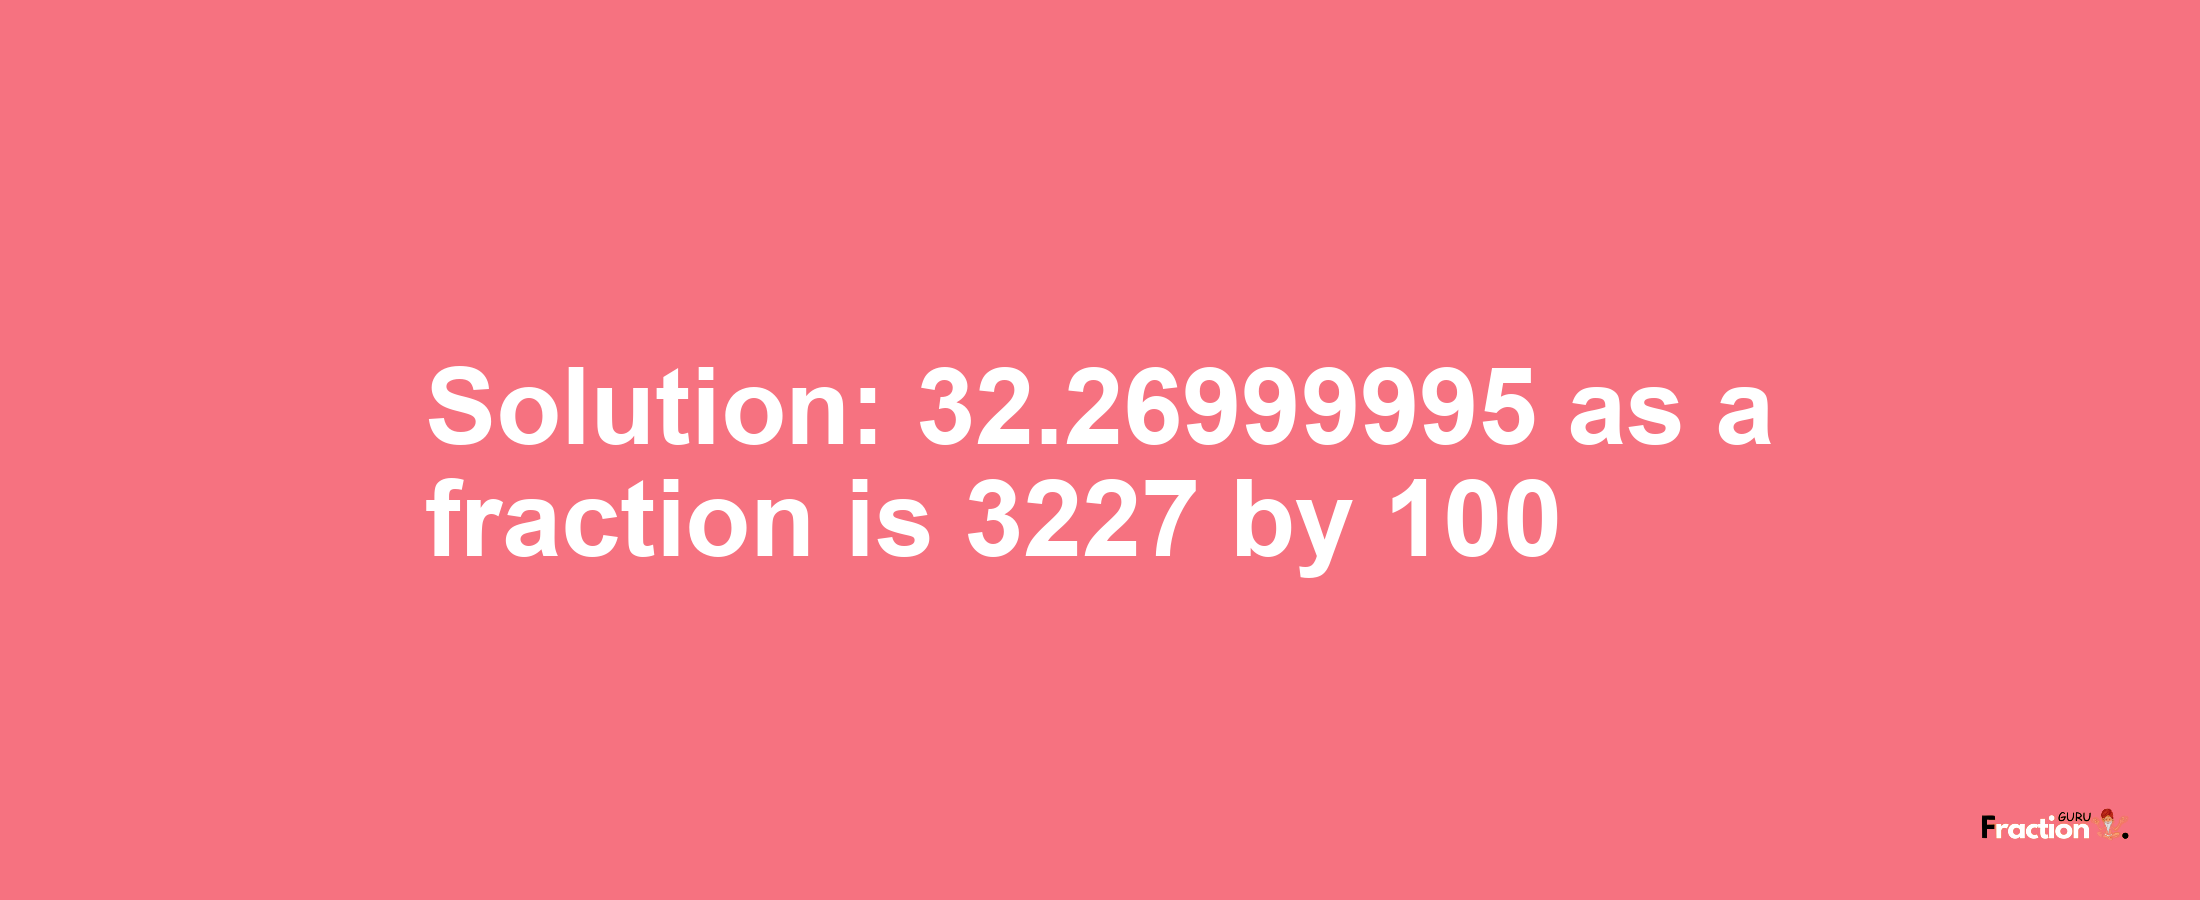 Solution:32.26999995 as a fraction is 3227/100